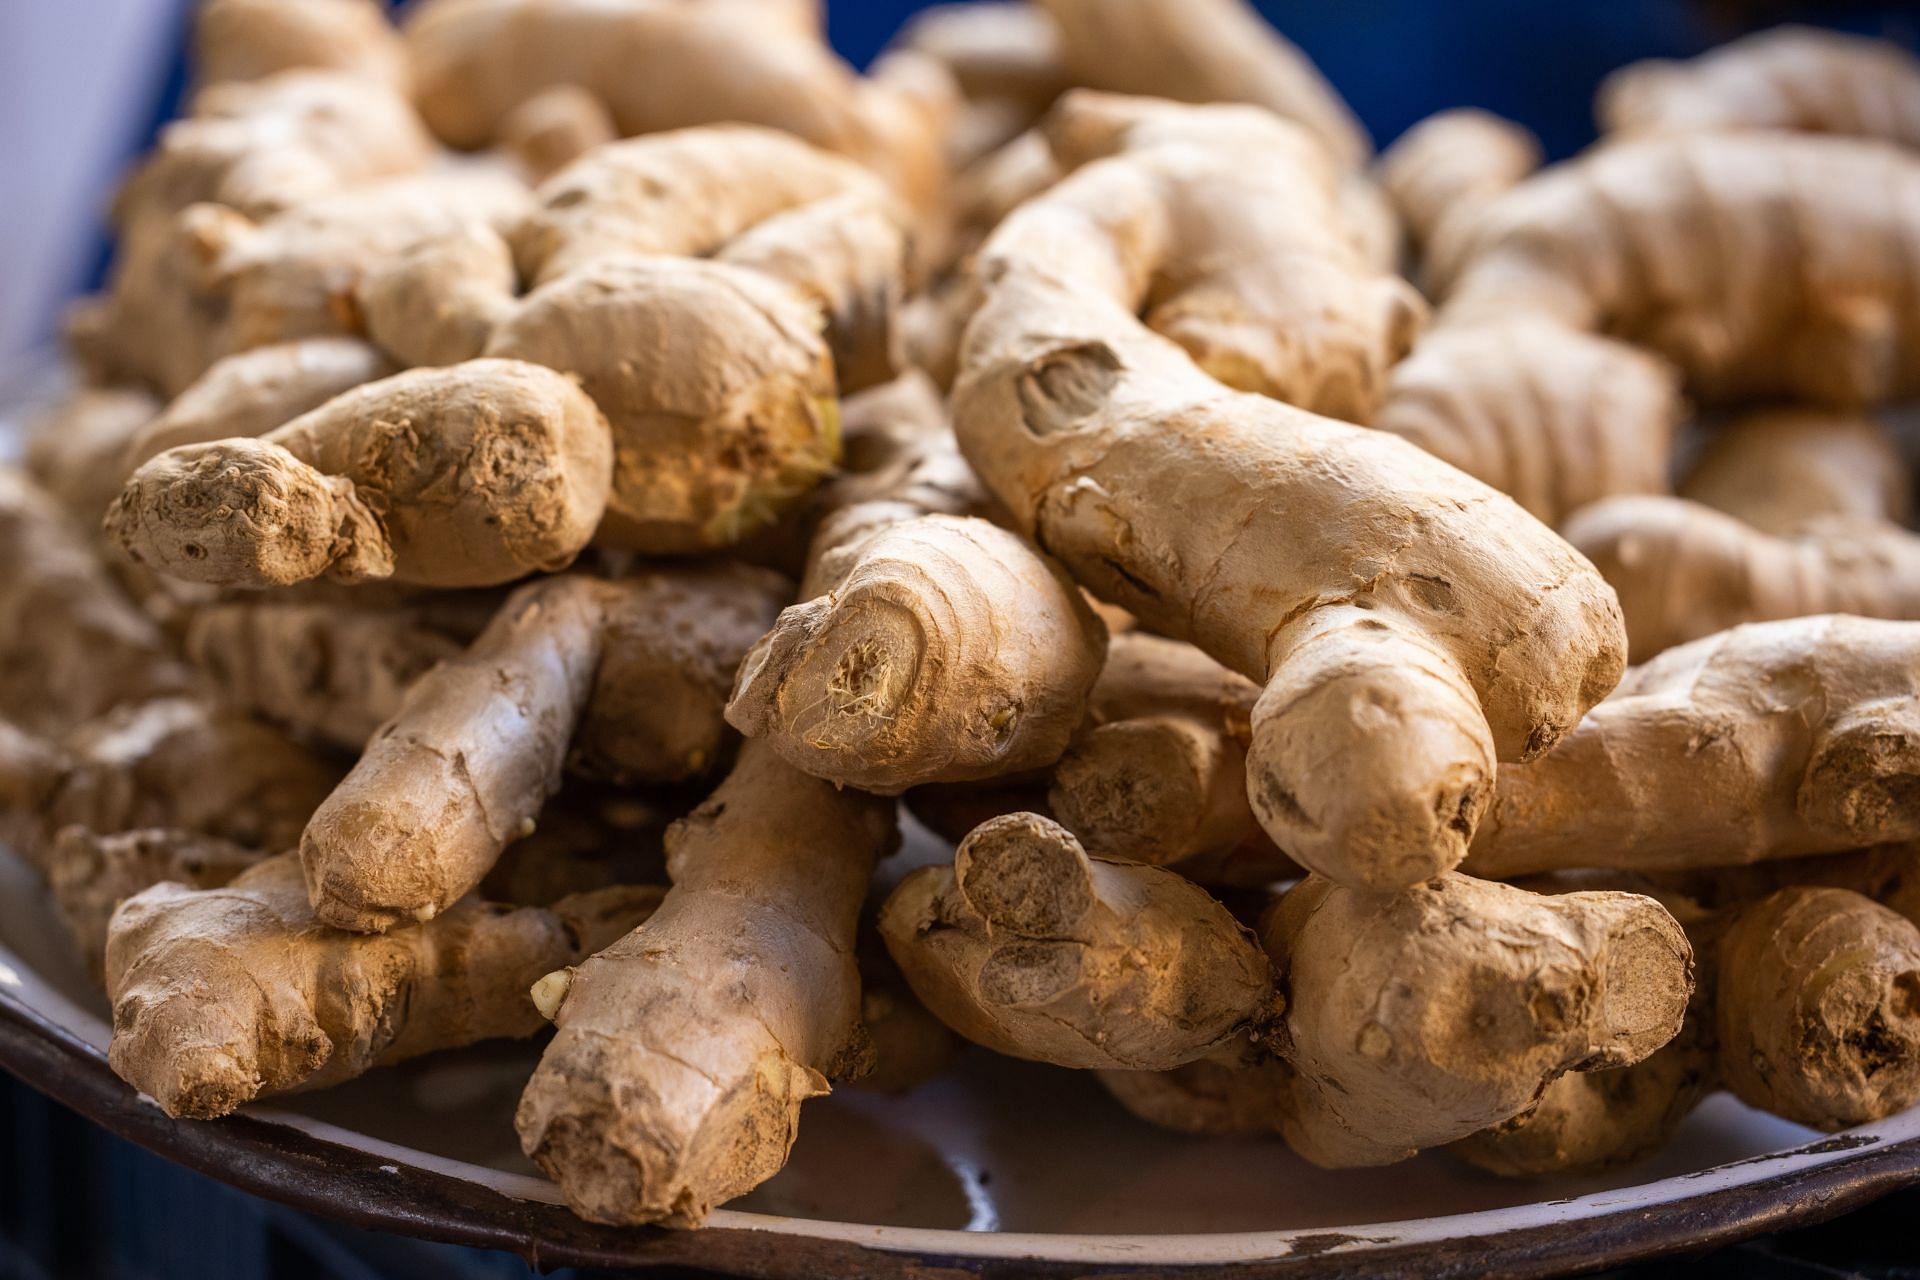 Ginger as salt substitute for diabetes (image sourced via Pexels / Photo by Engin)